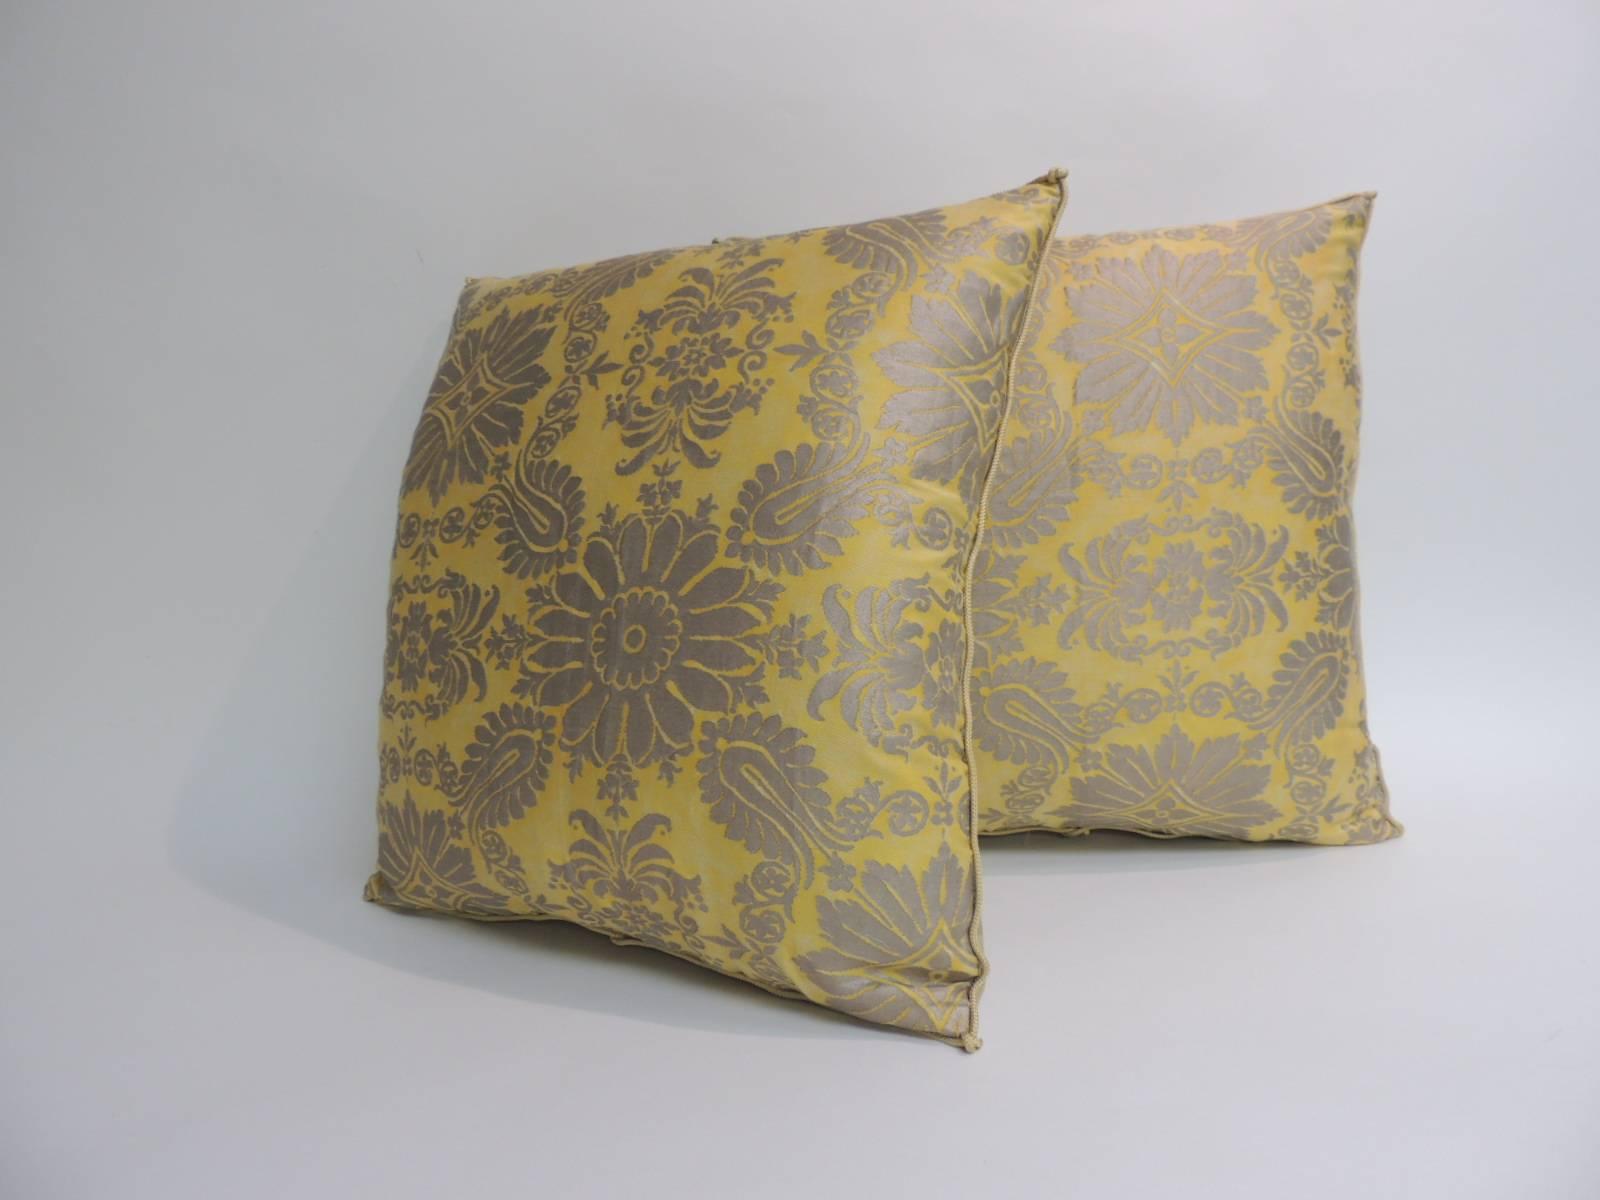 Beaux Arts Pair of Vintage Yellow and Gold Floral Fortuny Decorative Pillows